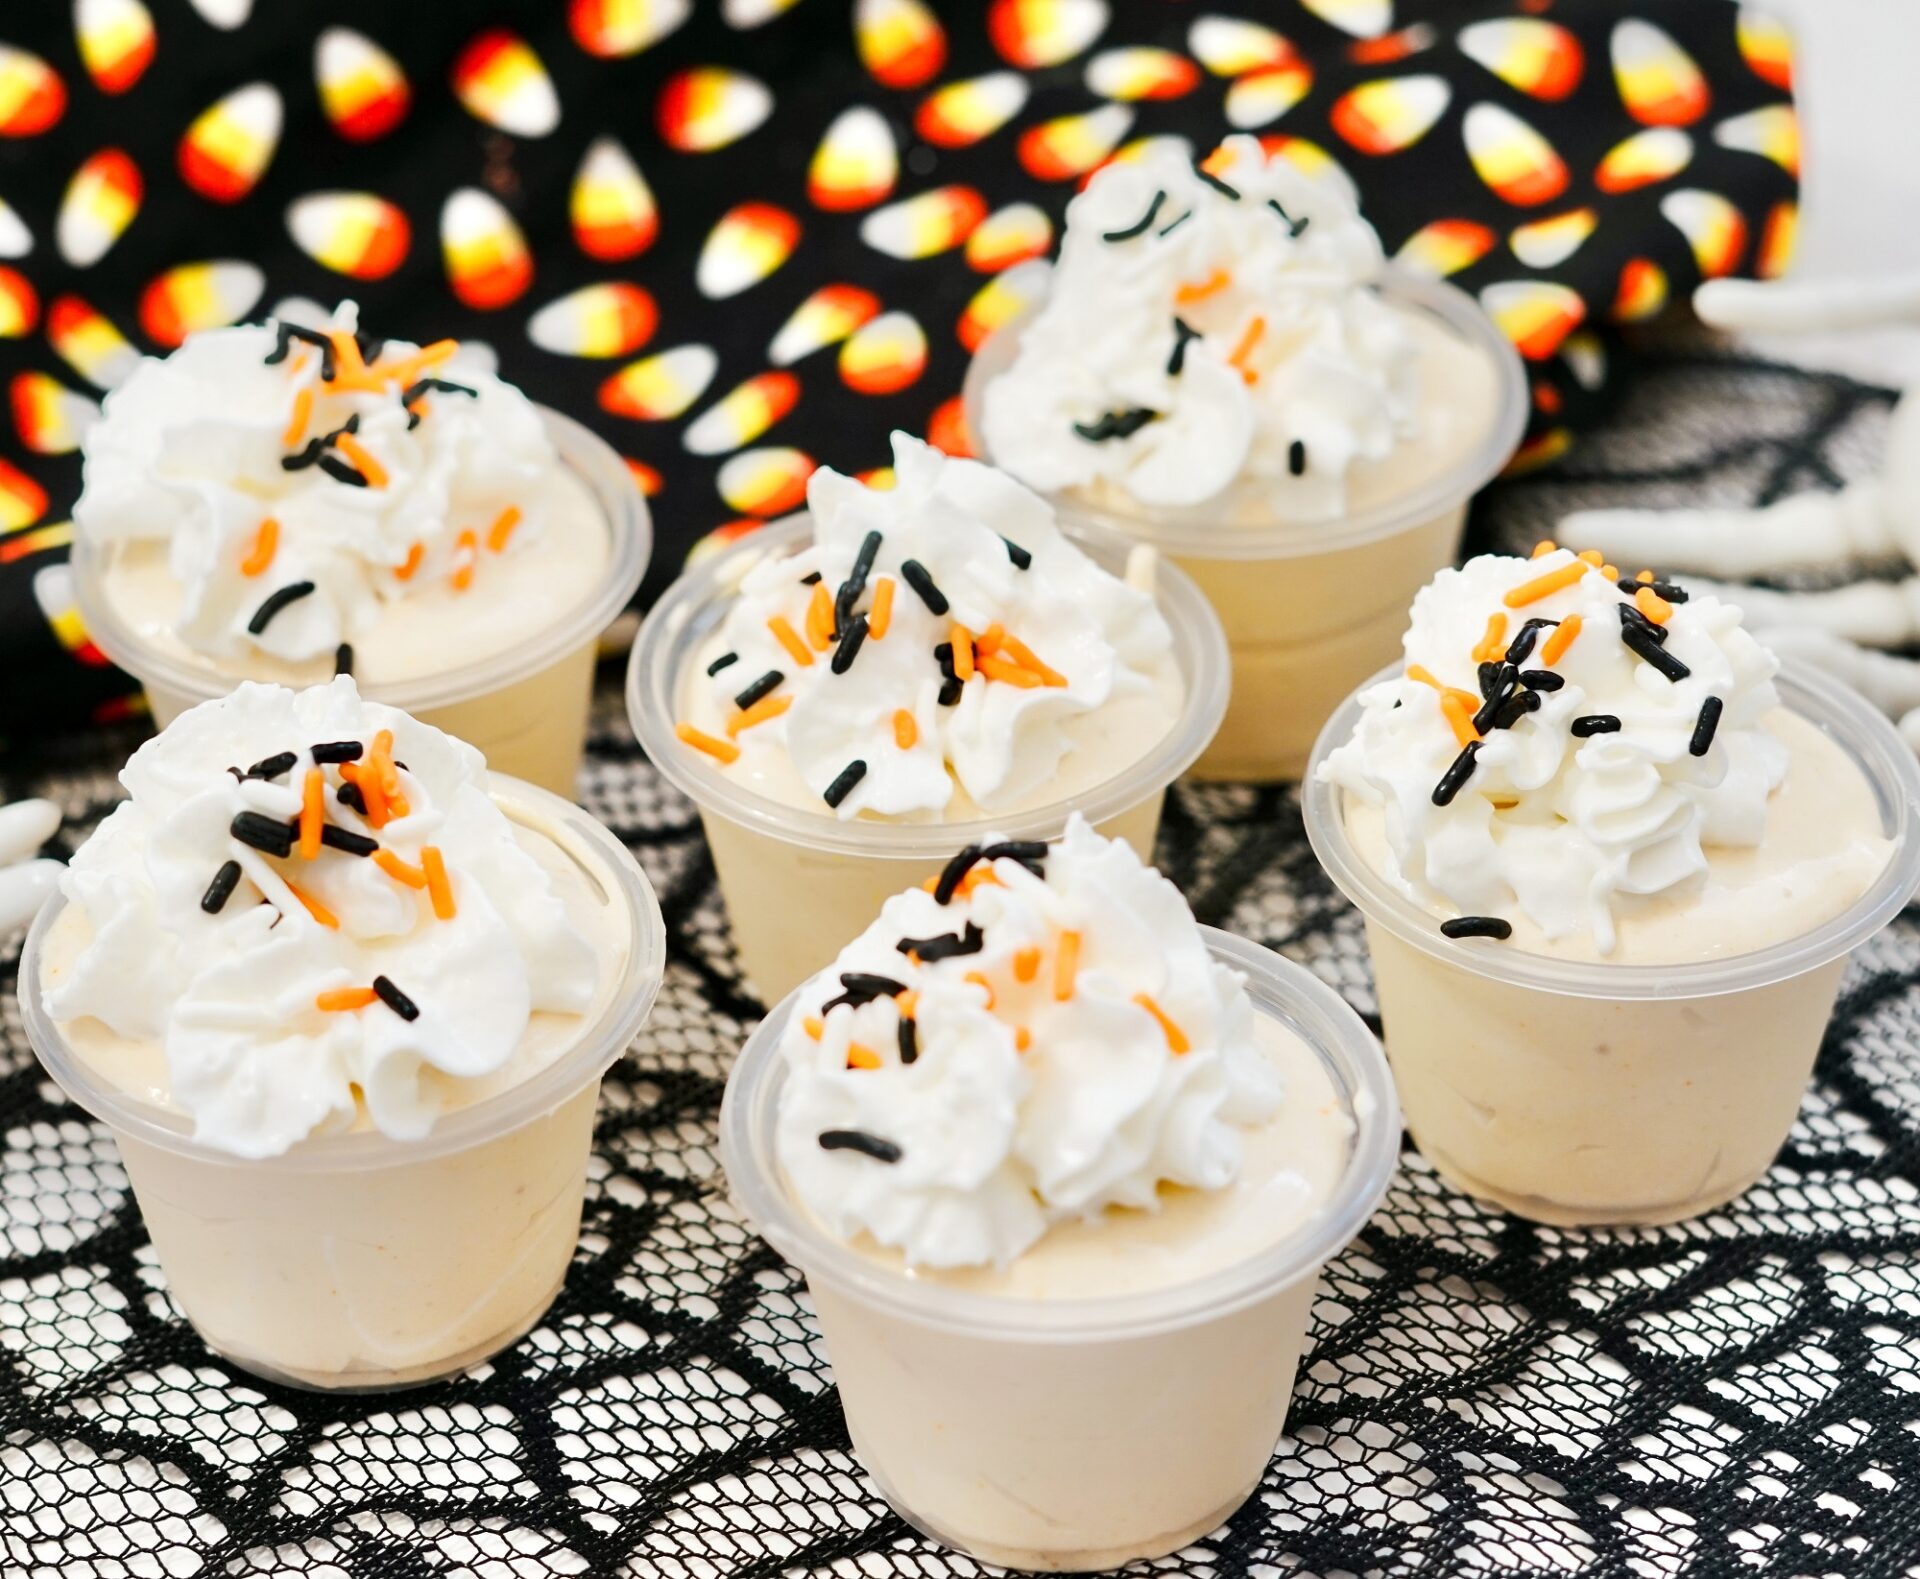 Rumchata pudding shots on a counter with Halloween decor.